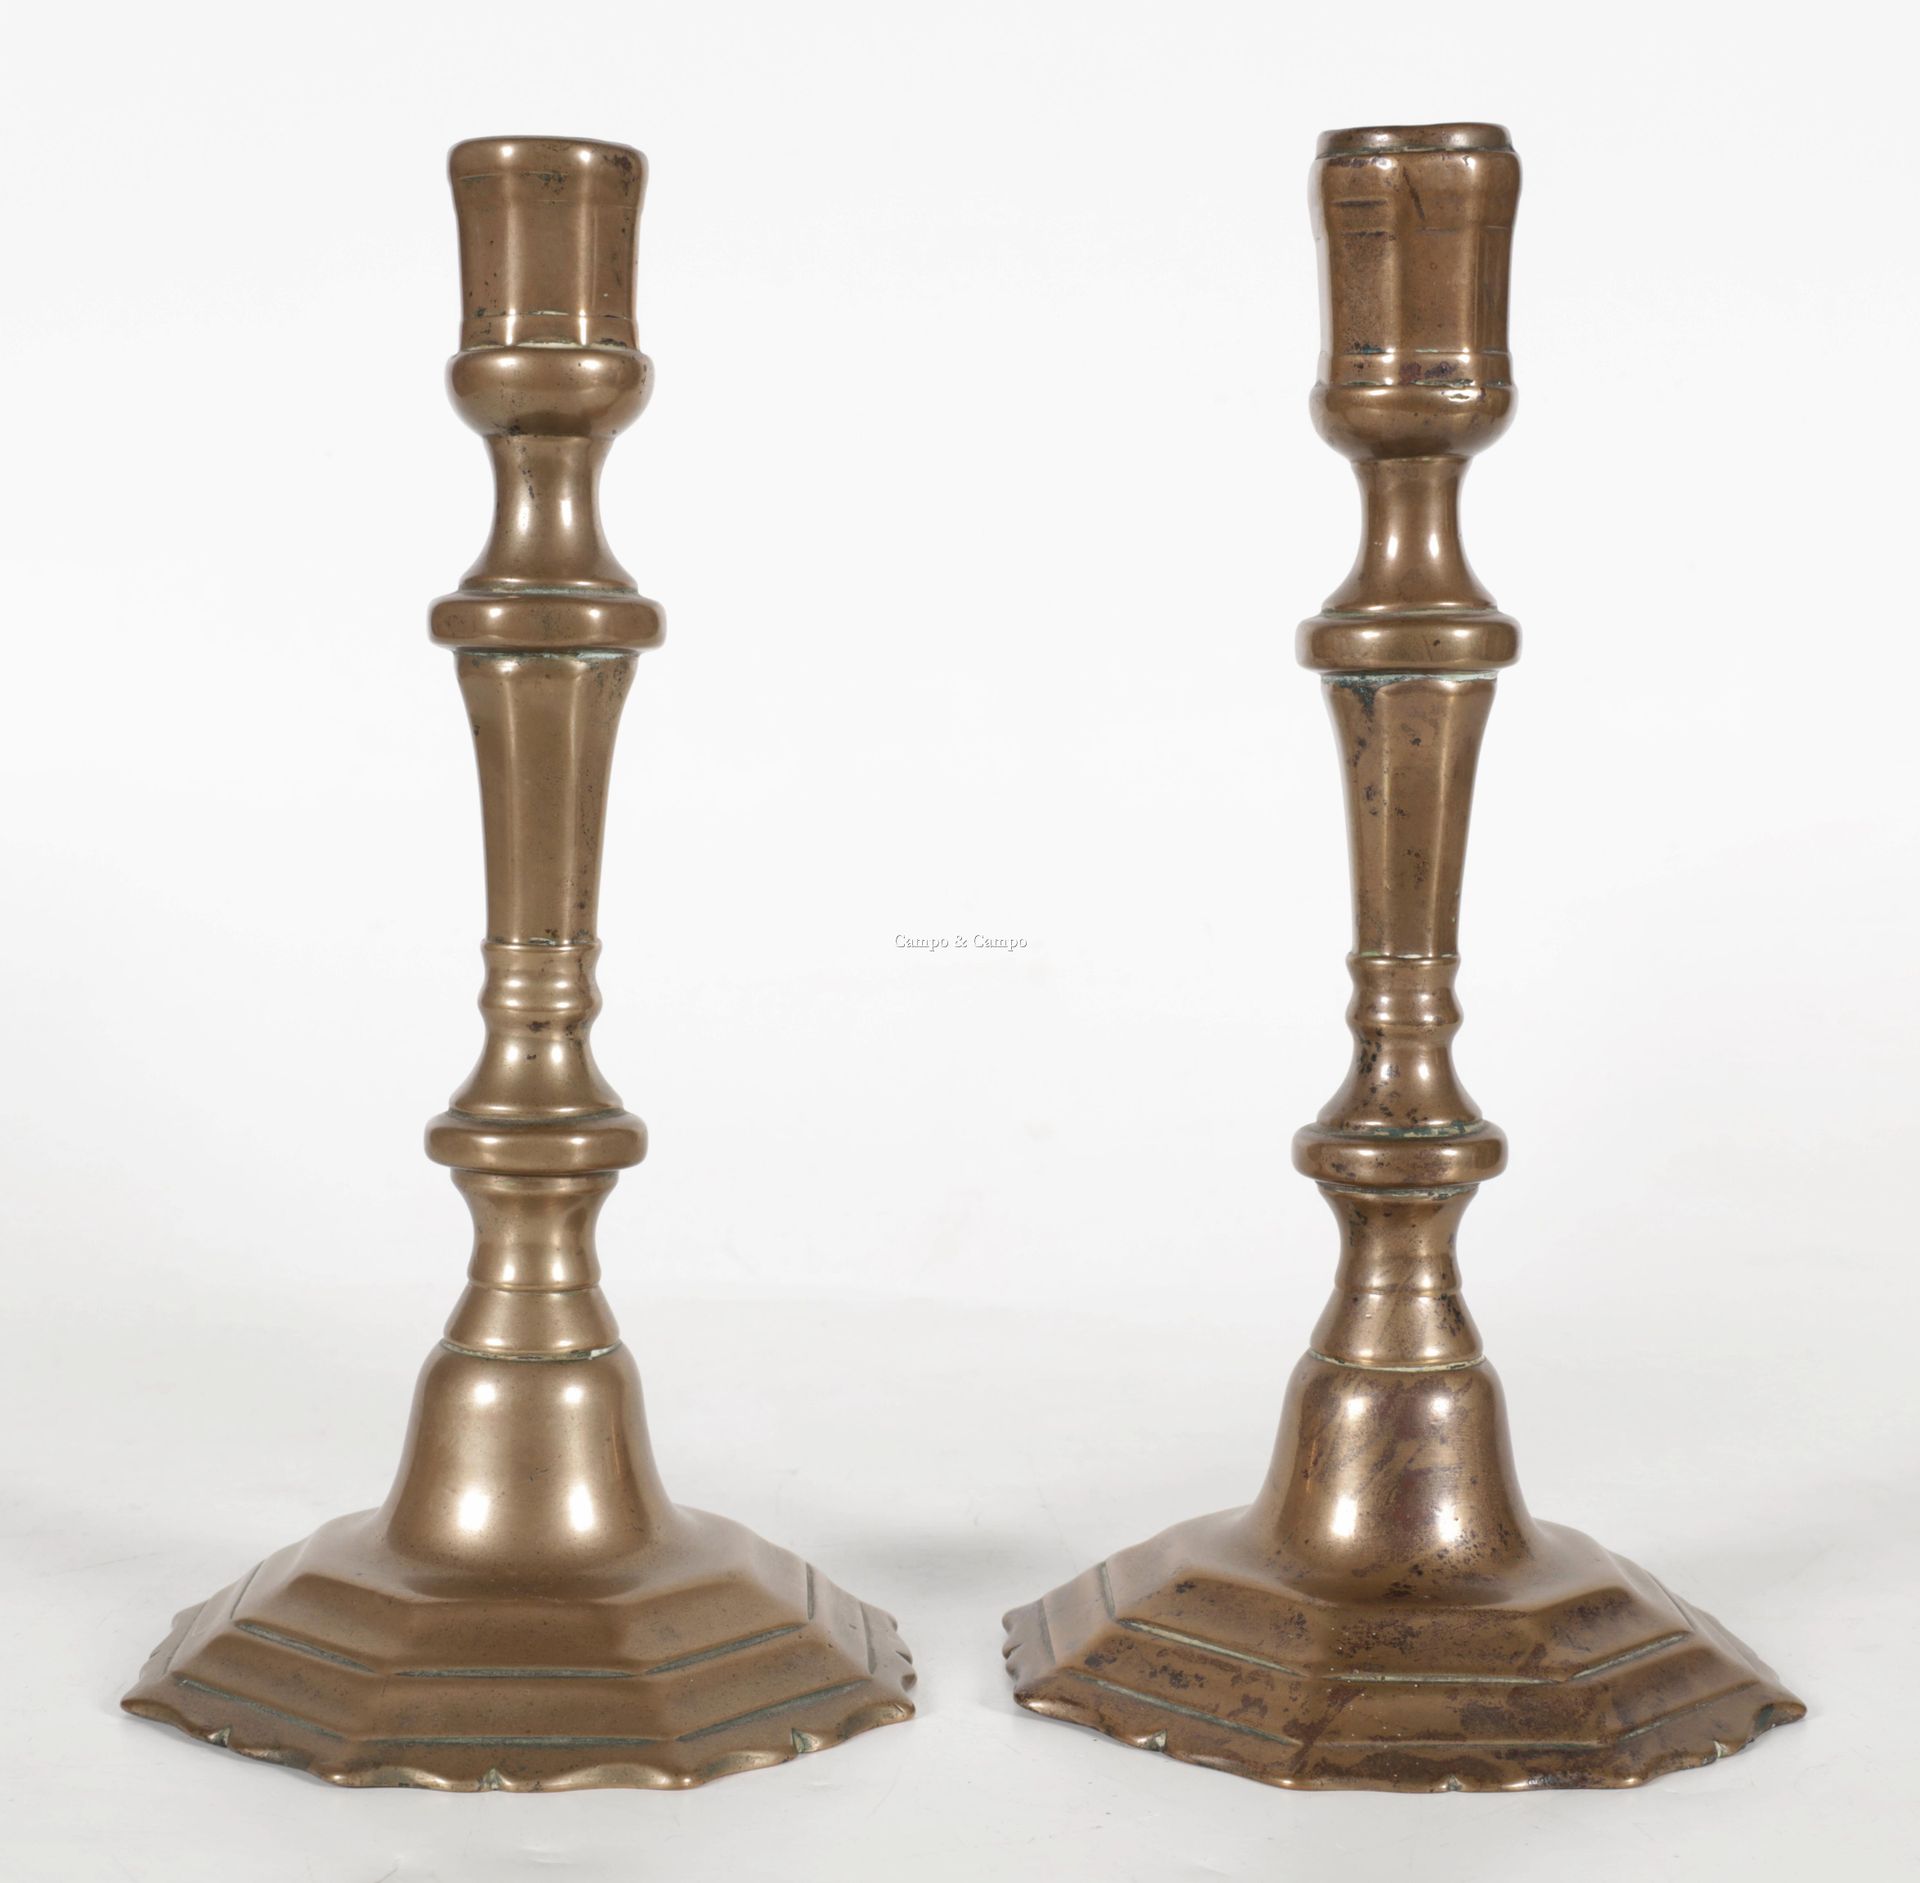 VARIA Pair of bronze candlesticks with baluster-shaped shaft, 18th century
Paar &hellip;